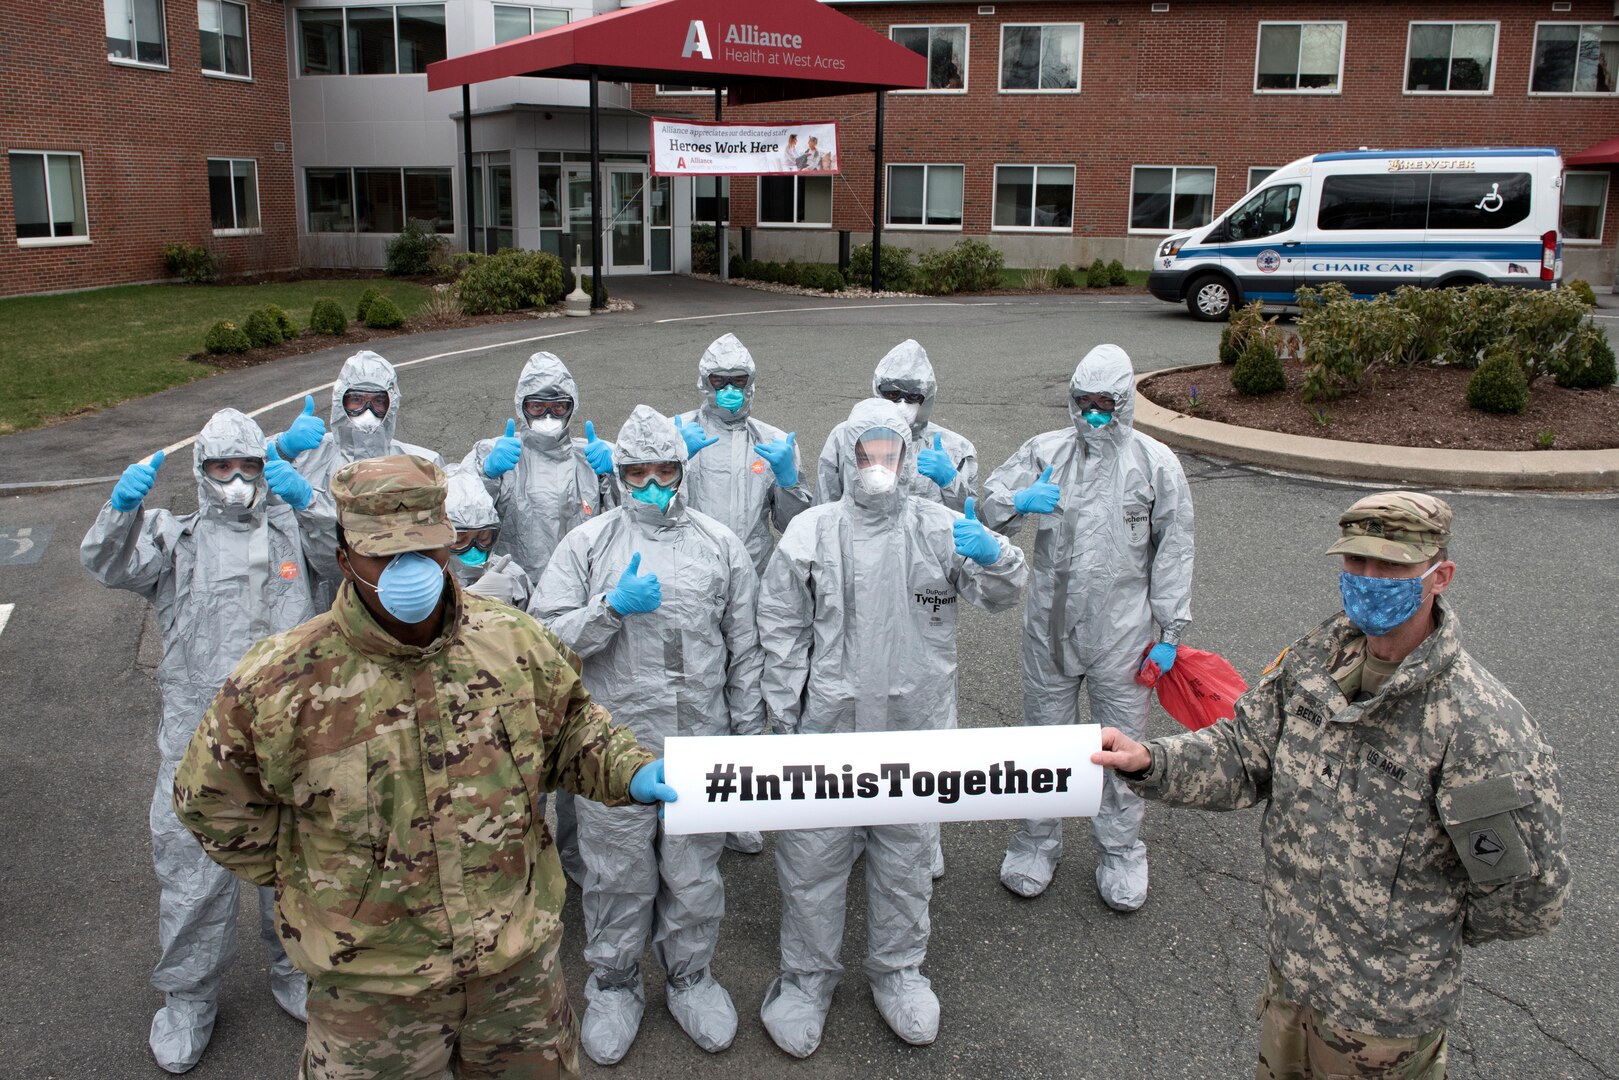 Soldiers and Airmen from the Massachusetts National Guard gather before testing residents for COVID-19 at the Alliance at West Acres nursing home, Brockton, Mass., April 10, 2020. Twelve medical teams are activated throughout the state to conduct testing at medical facilities and nursing homes with high-risk populations.